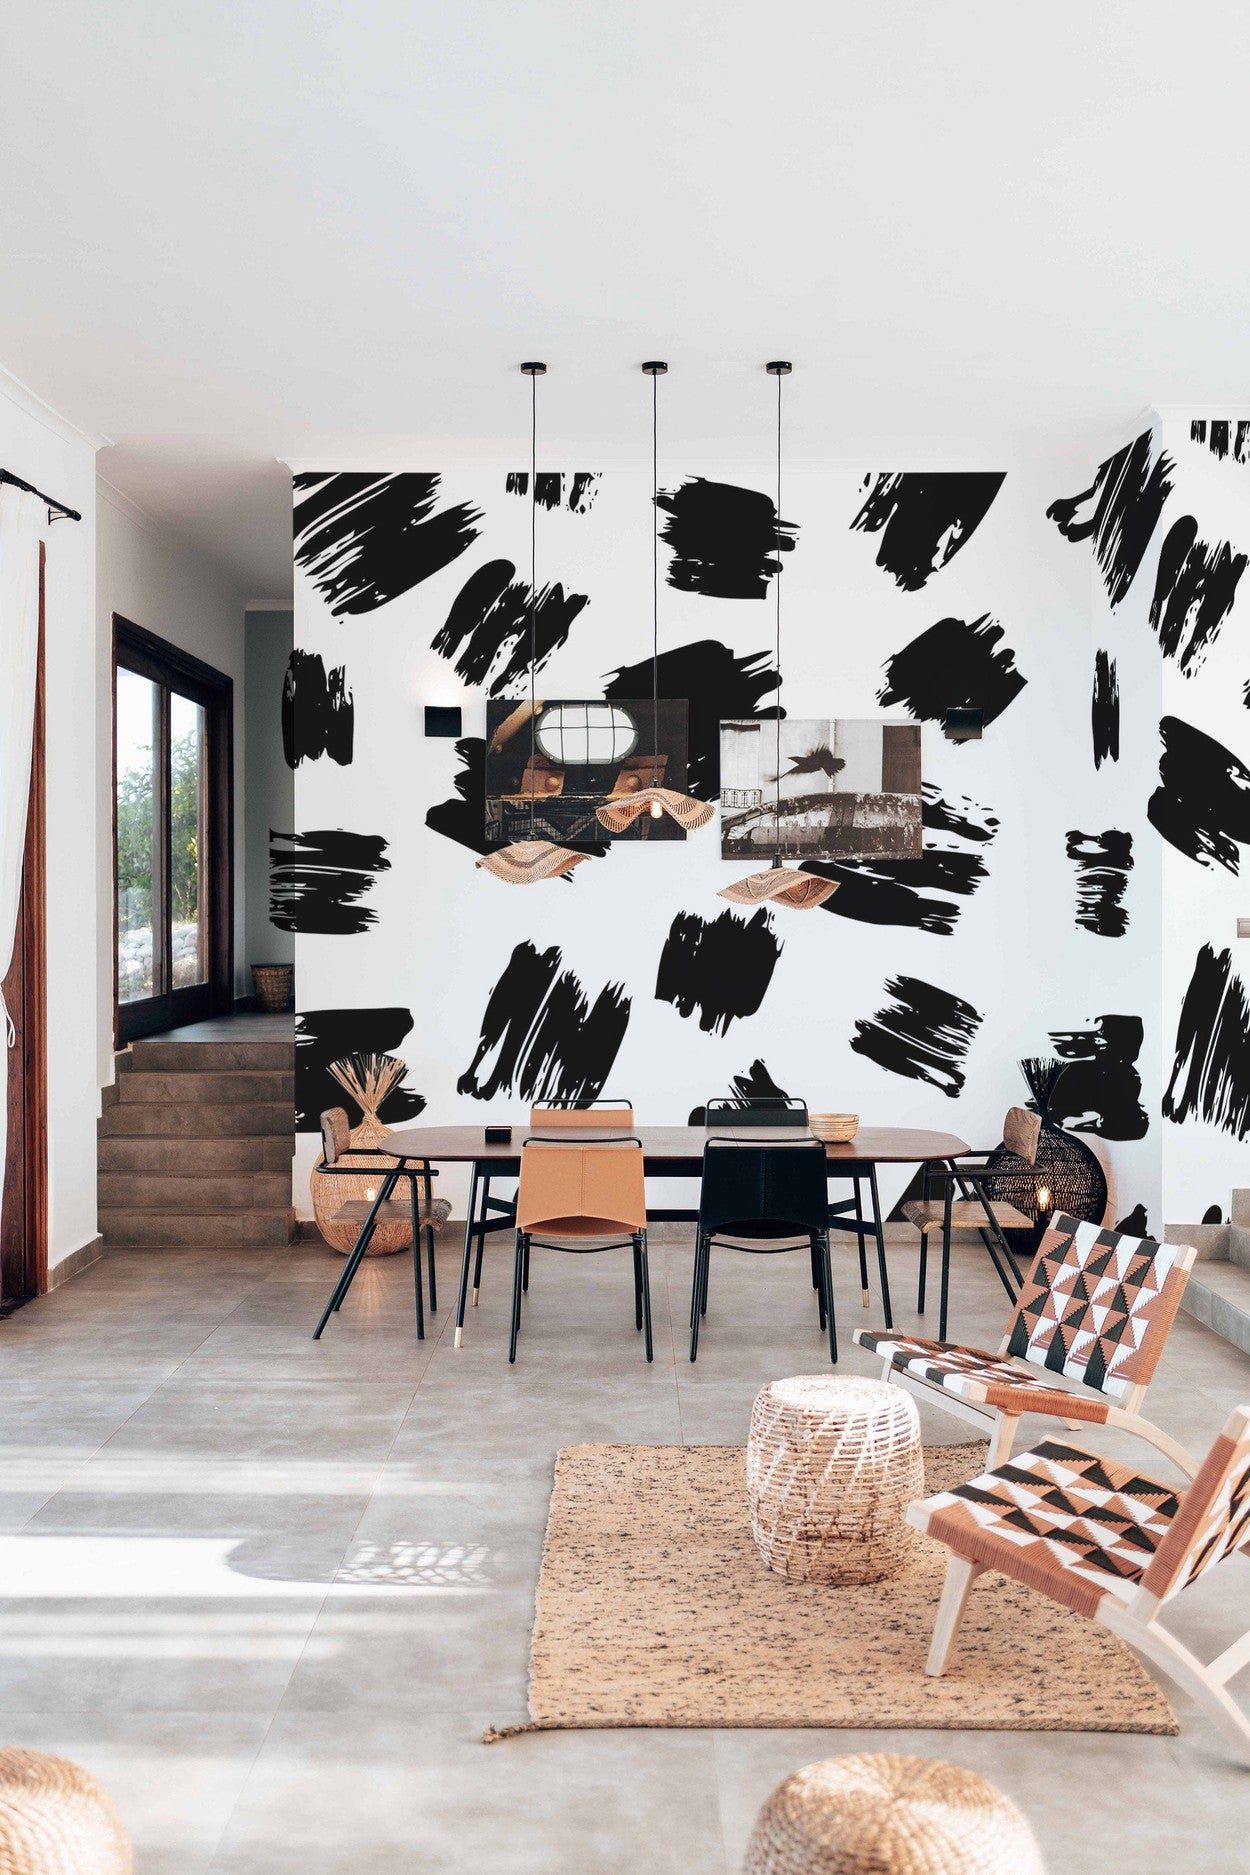 Stylish dining room interior with abstract black and white wall mural, contemporary furniture and natural light